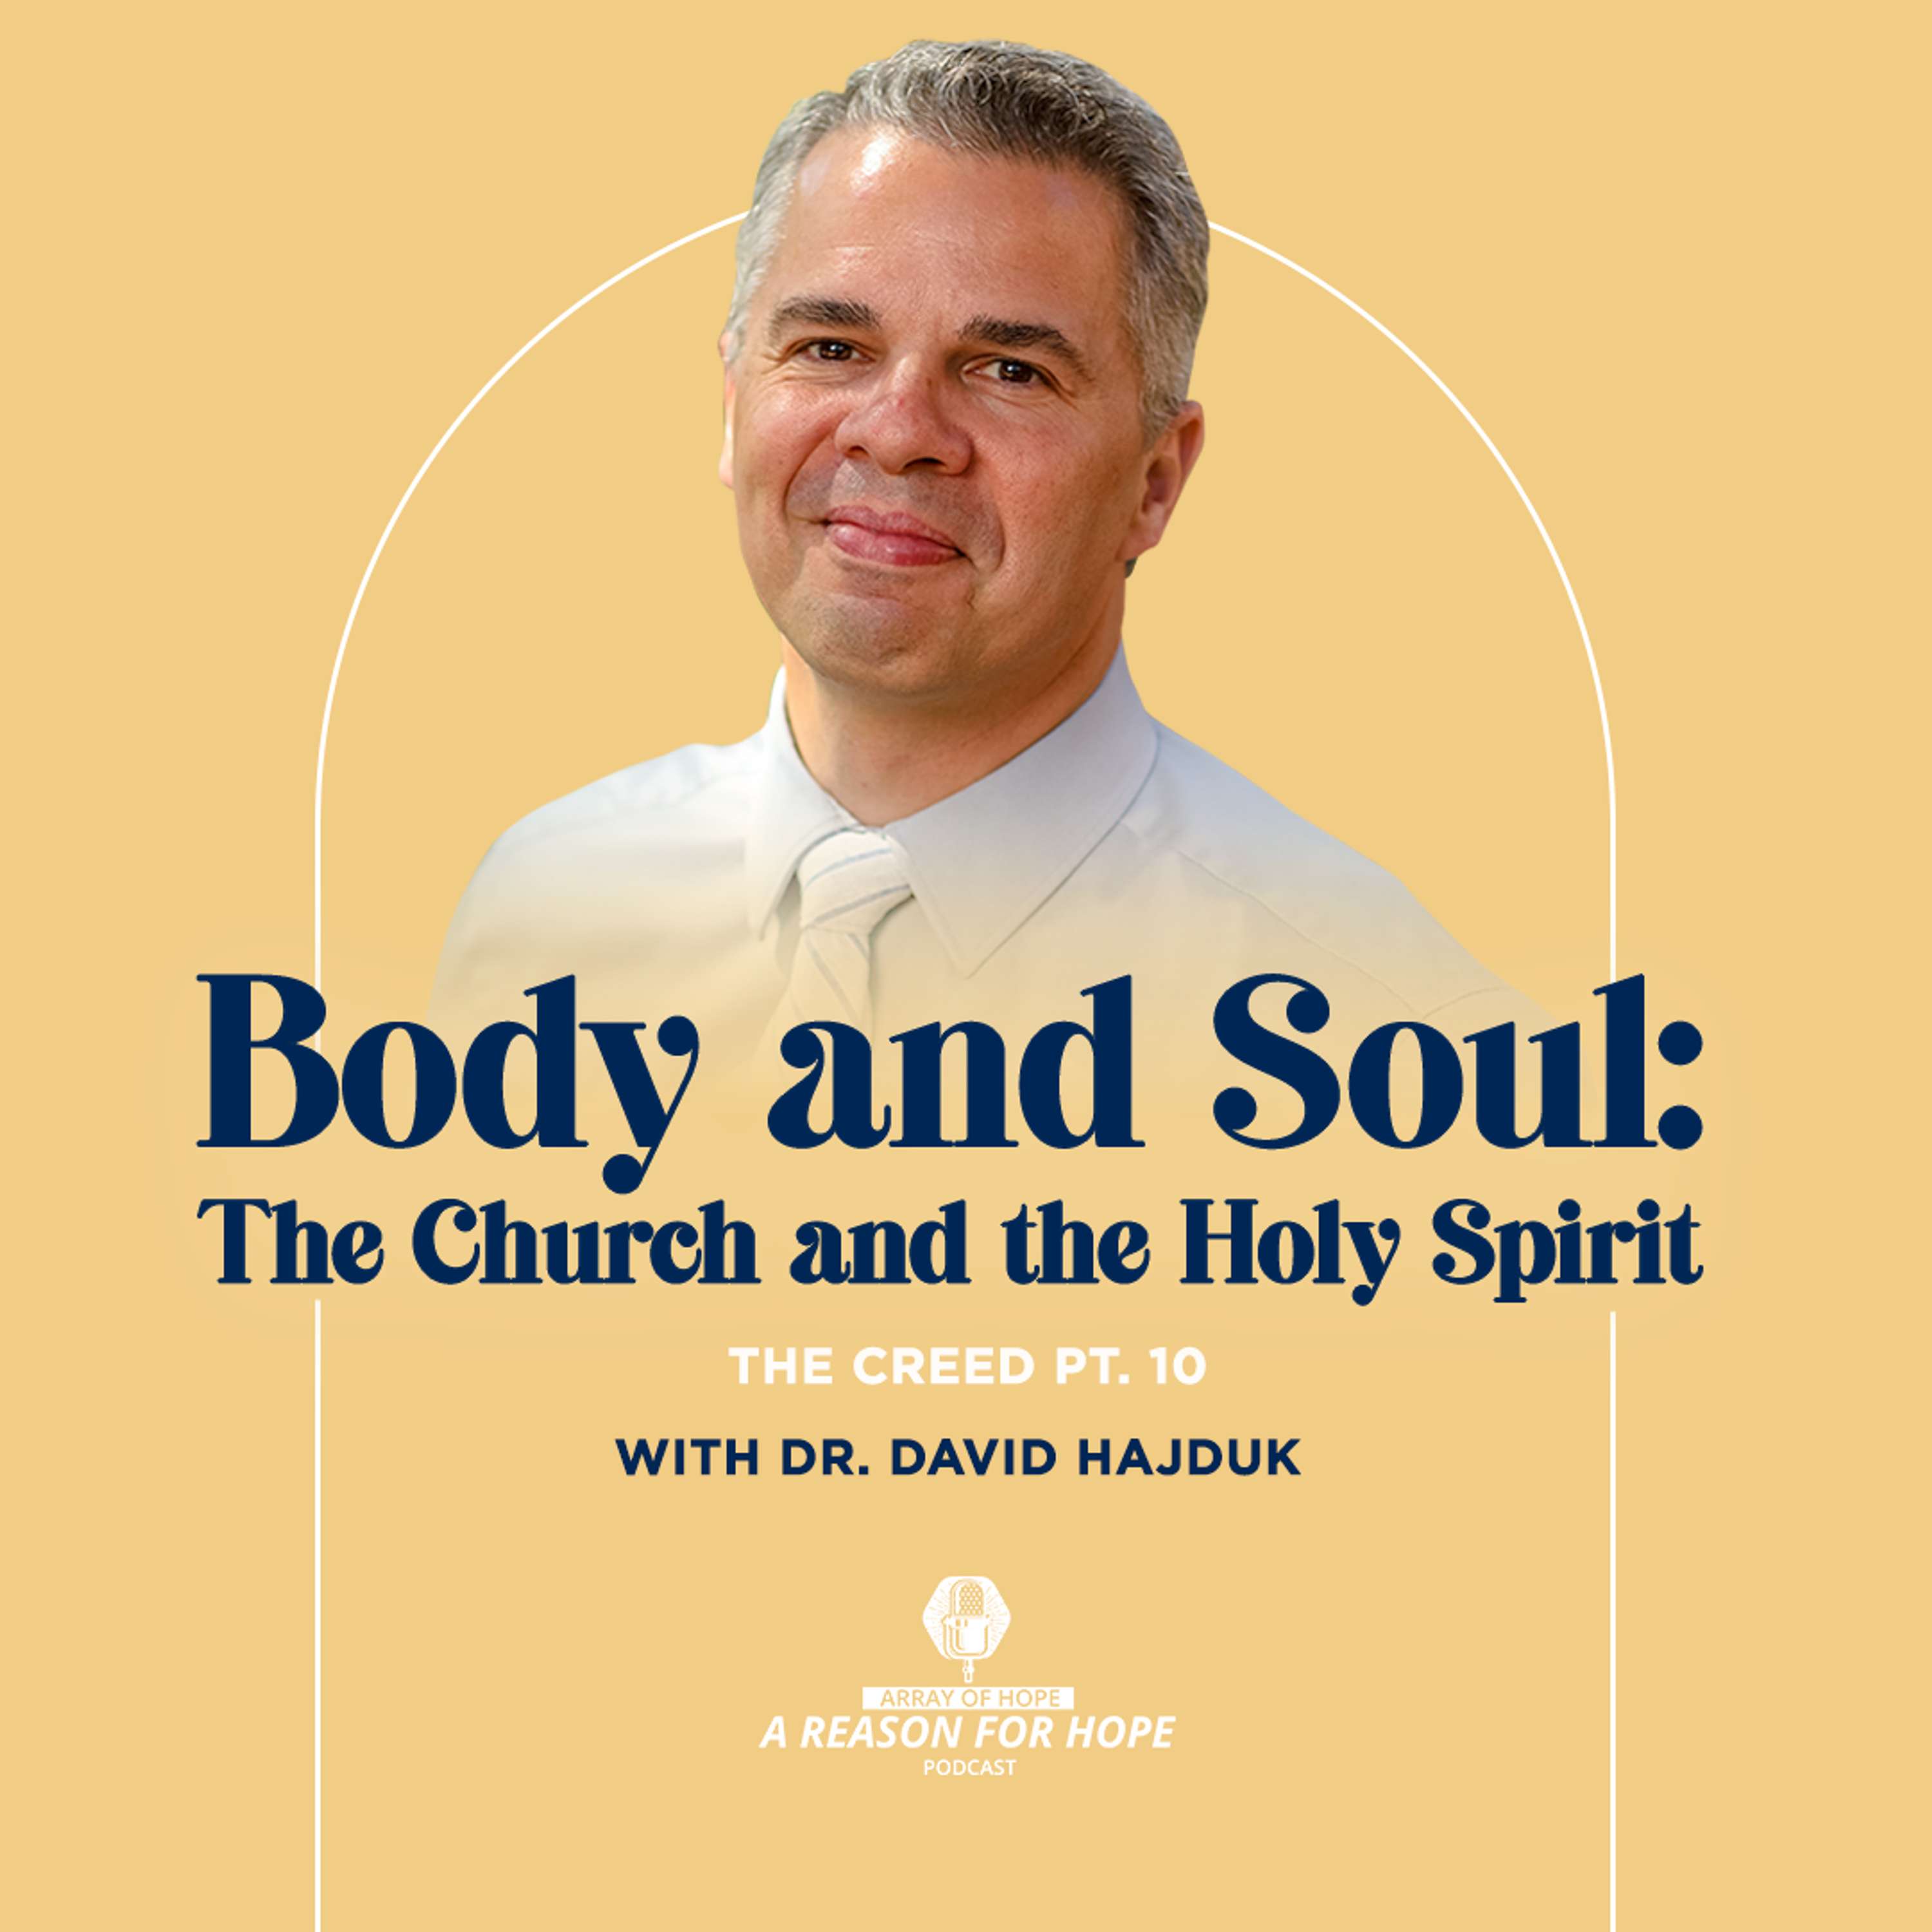 Body and Soul: The Church and the Holy Spirit | The Creed (Pt. 10) | DM